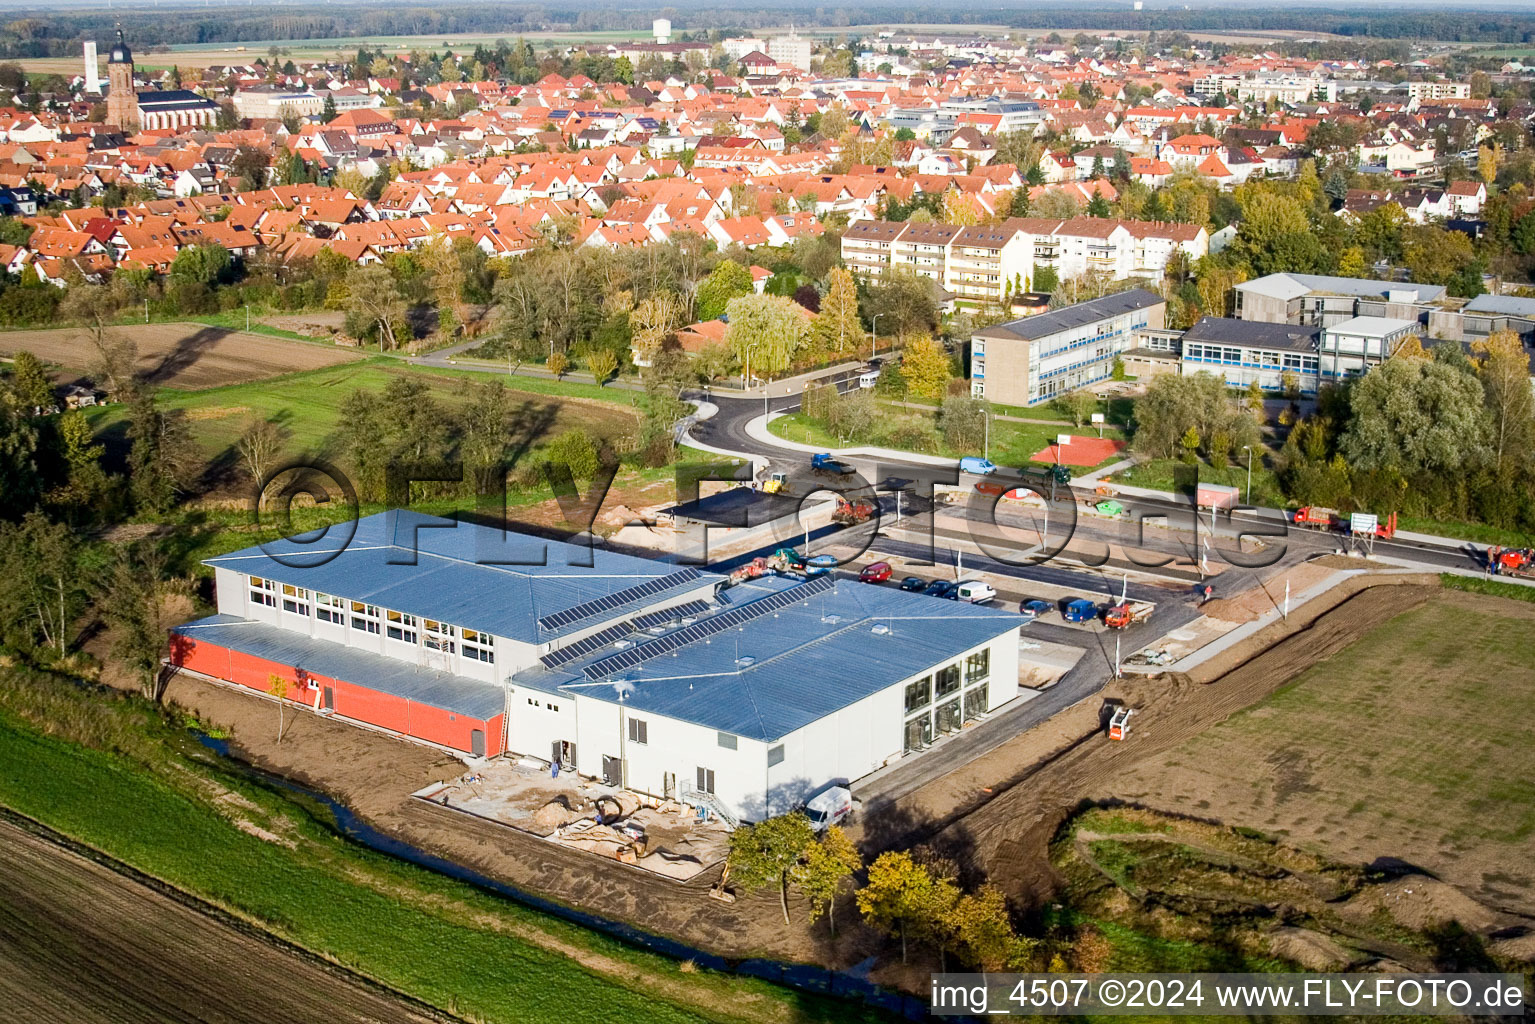 Building of the indoor arena Bienwaldhalle in Kandel in the state Rhineland-Palatinate